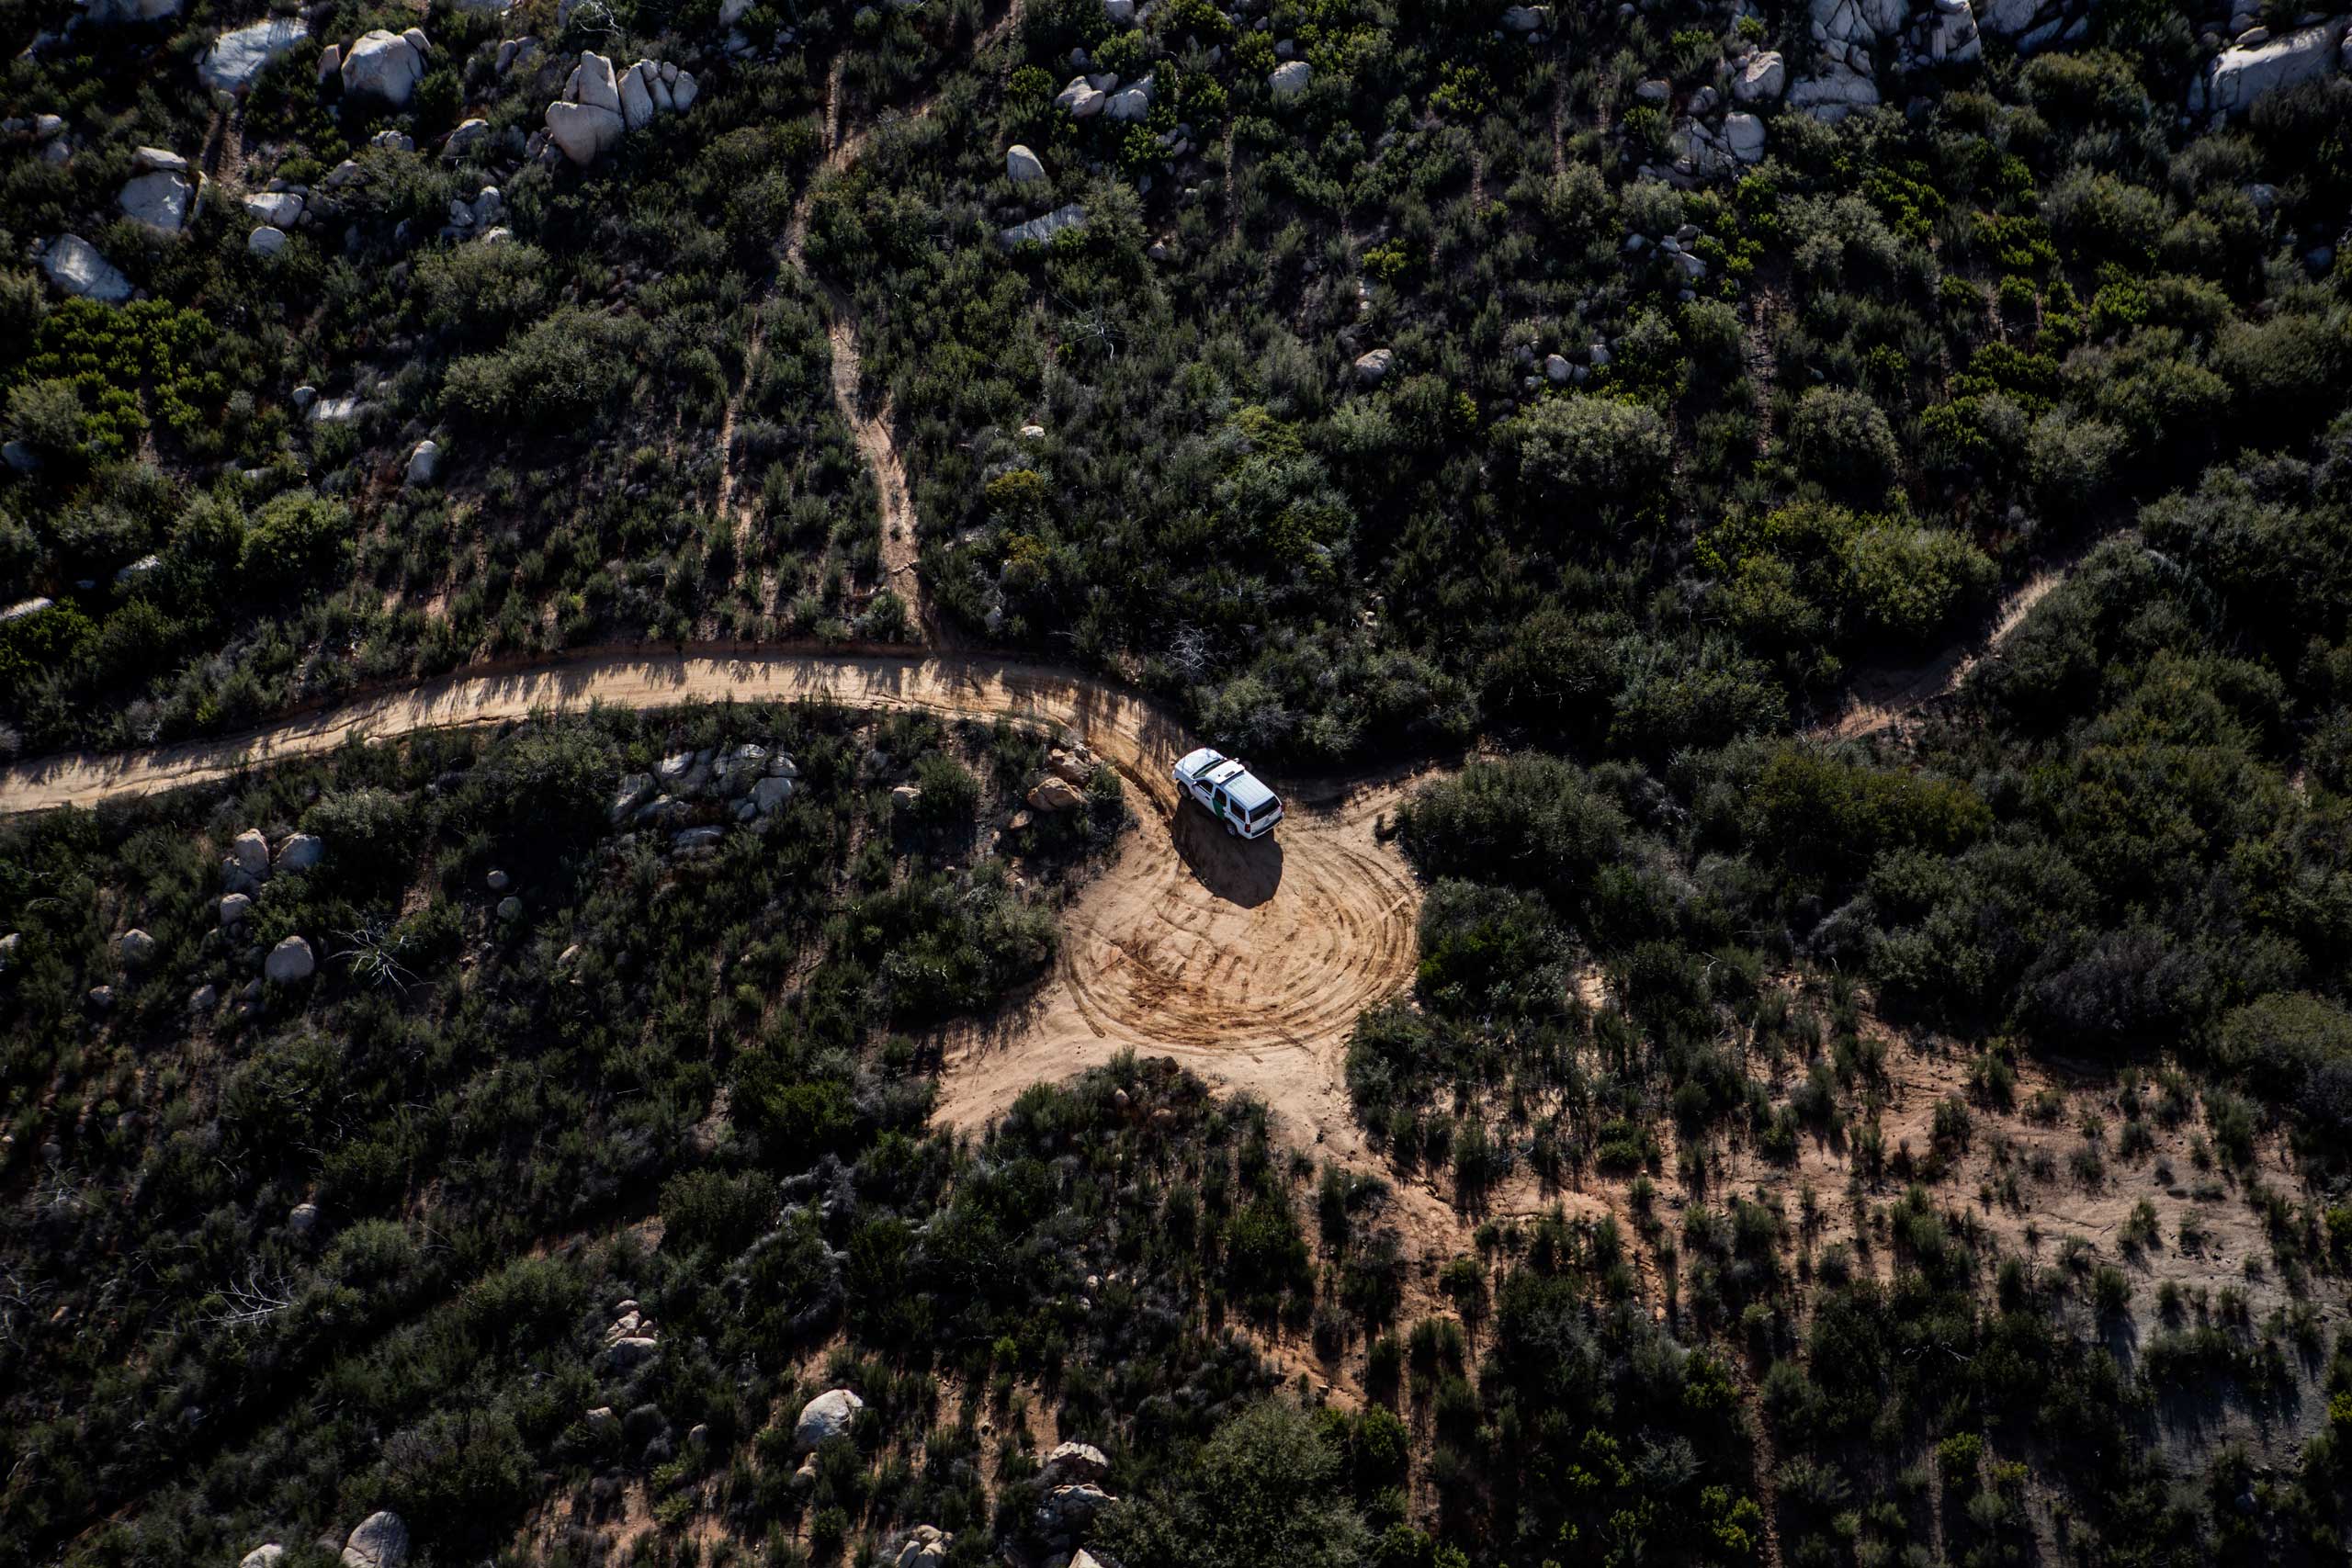 A border patrol vehicle on the remote terrain along the border in Southern California, east of San Diego, Feb. 15, 2013.